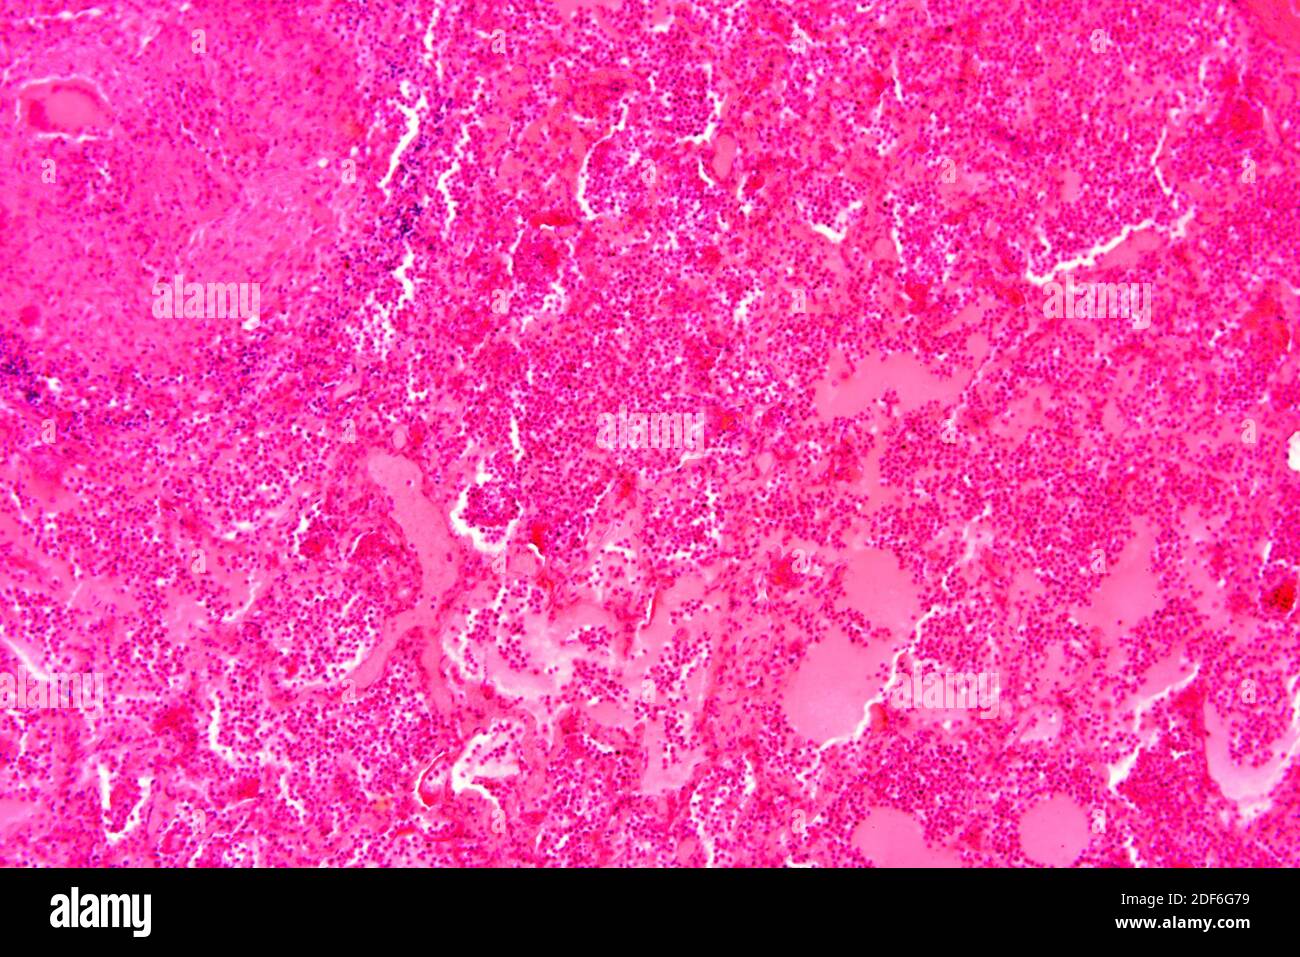 Human tuberculosis lung section. Optical microscope X100. Stock Photo